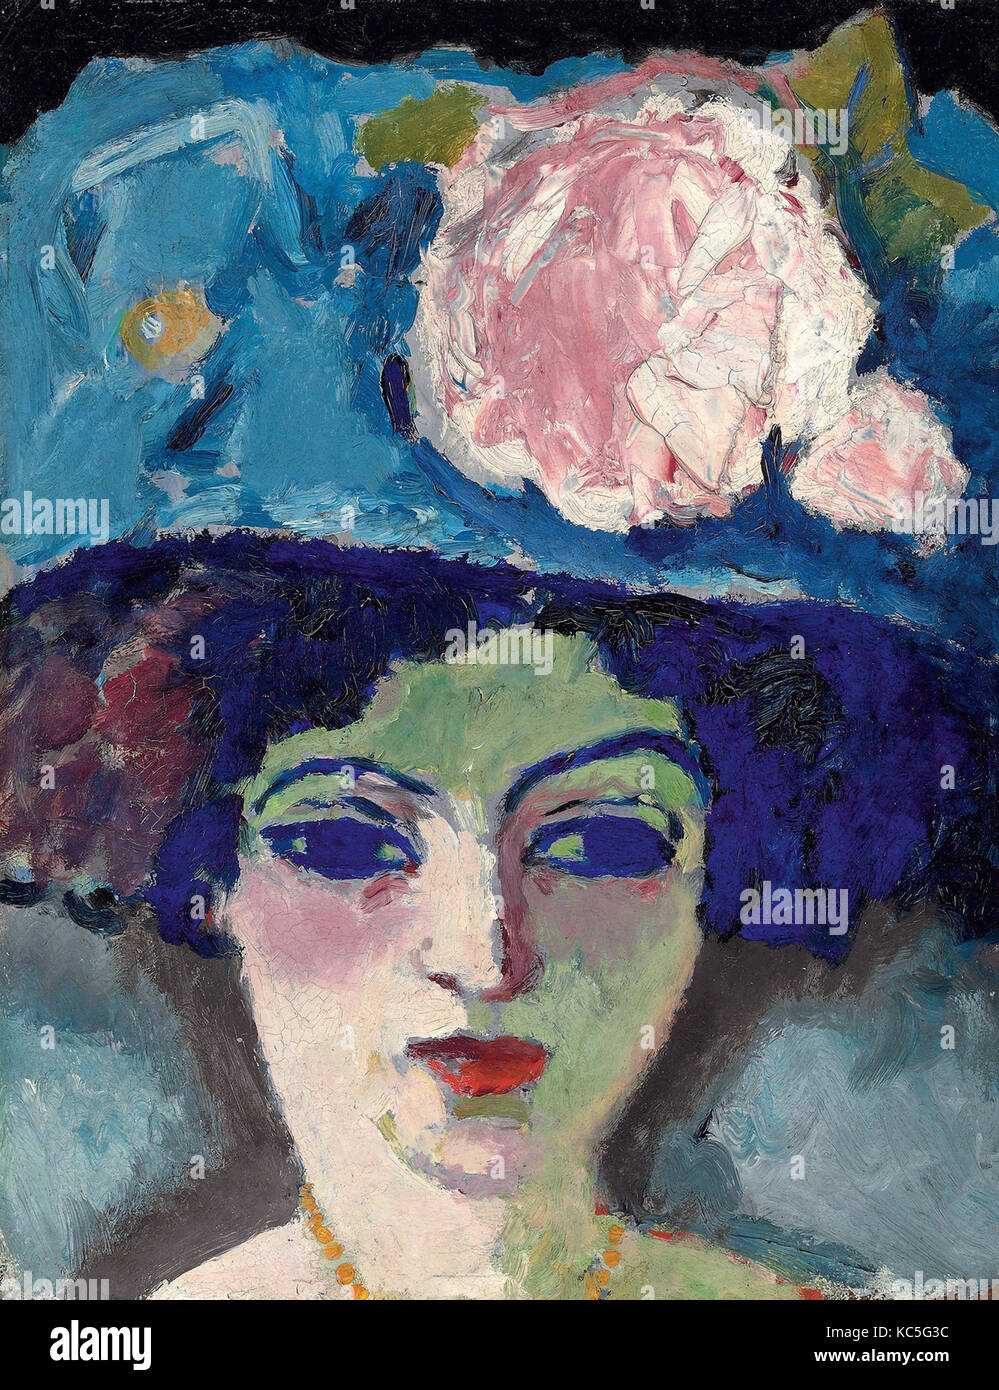 Kees van dongen femme High Resolution Stock Photography and Images - Alamy